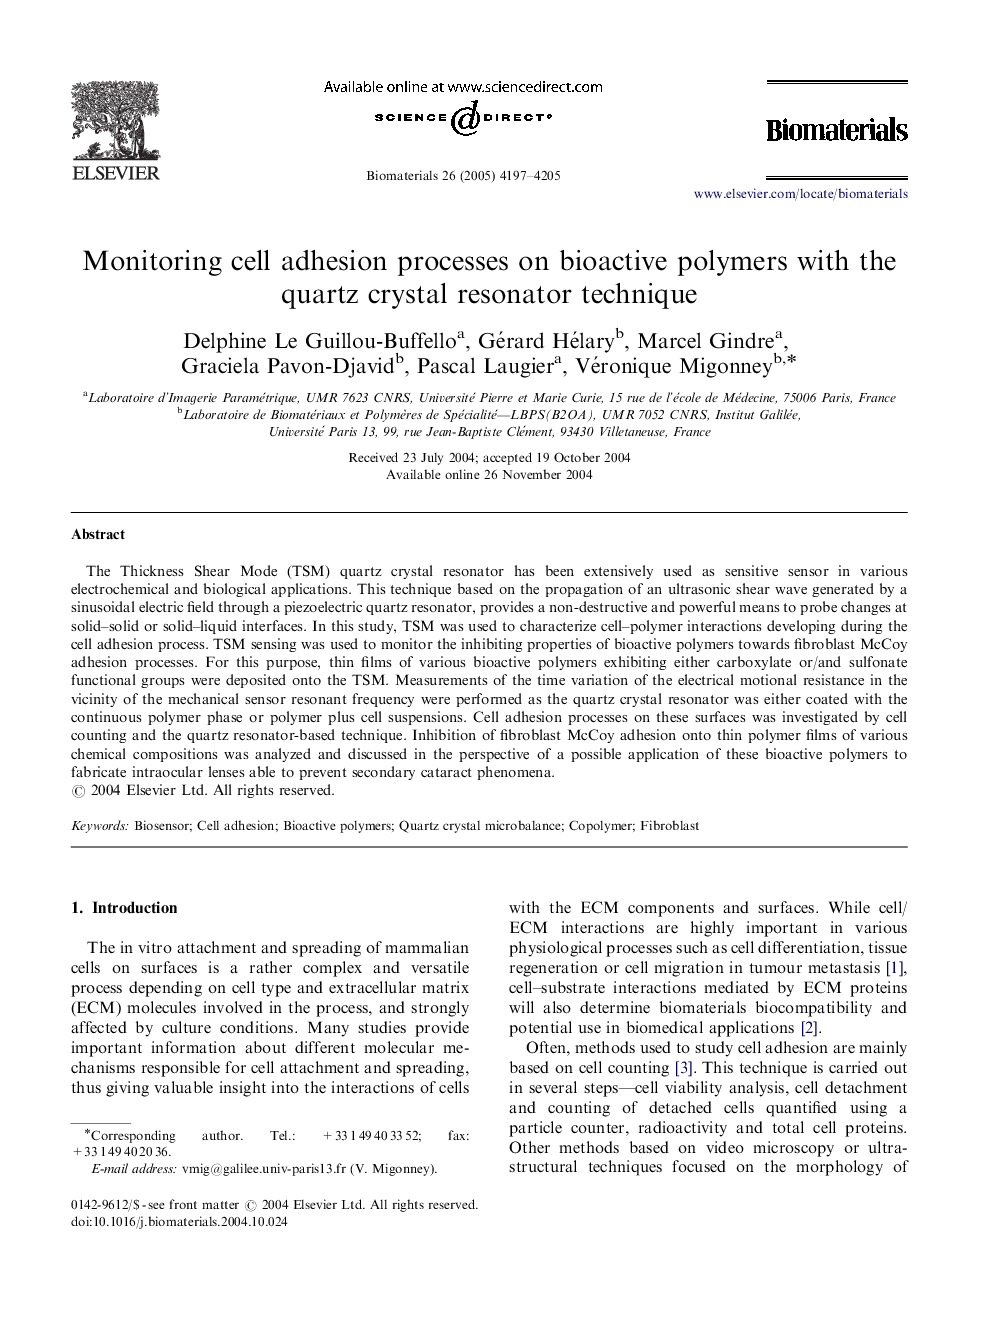 Monitoring cell adhesion processes on bioactive polymers with the quartz crystal resonator technique